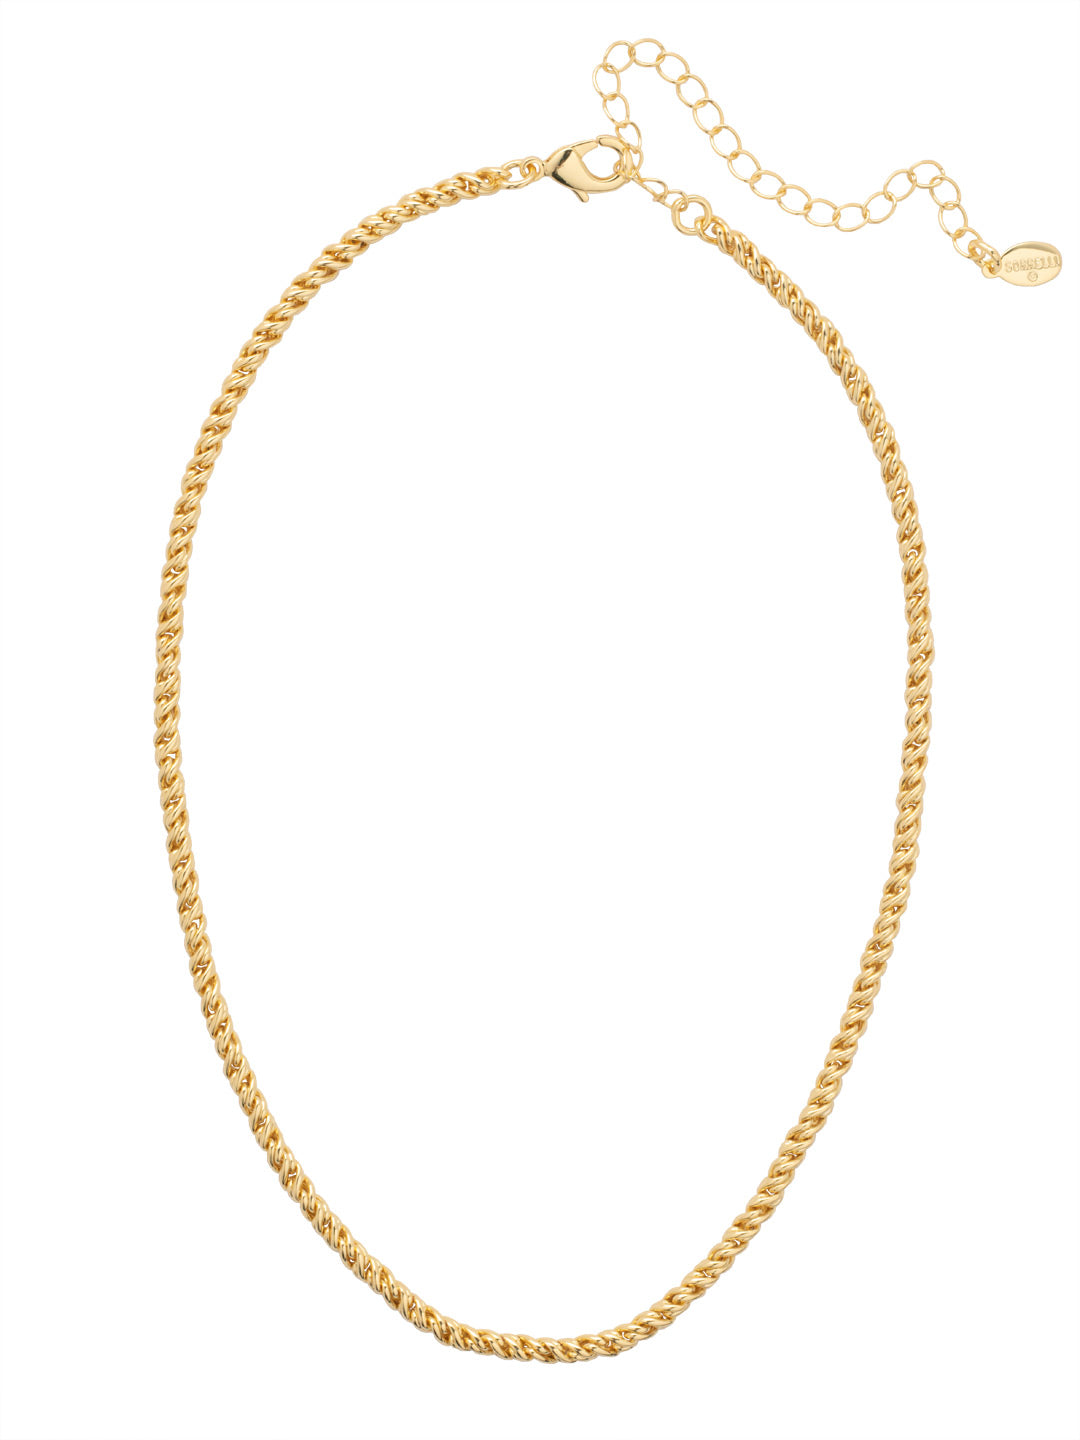 Rope Chain Tennis Necklace - 4NFJ1BGMTL - <p>The Rope Chain Tennis Necklace features a single trendy rope chain with an extender, secured with a lobster claws clasp. From Sorrelli's Bare Metallic collection in our Bright Gold-tone finish.</p>